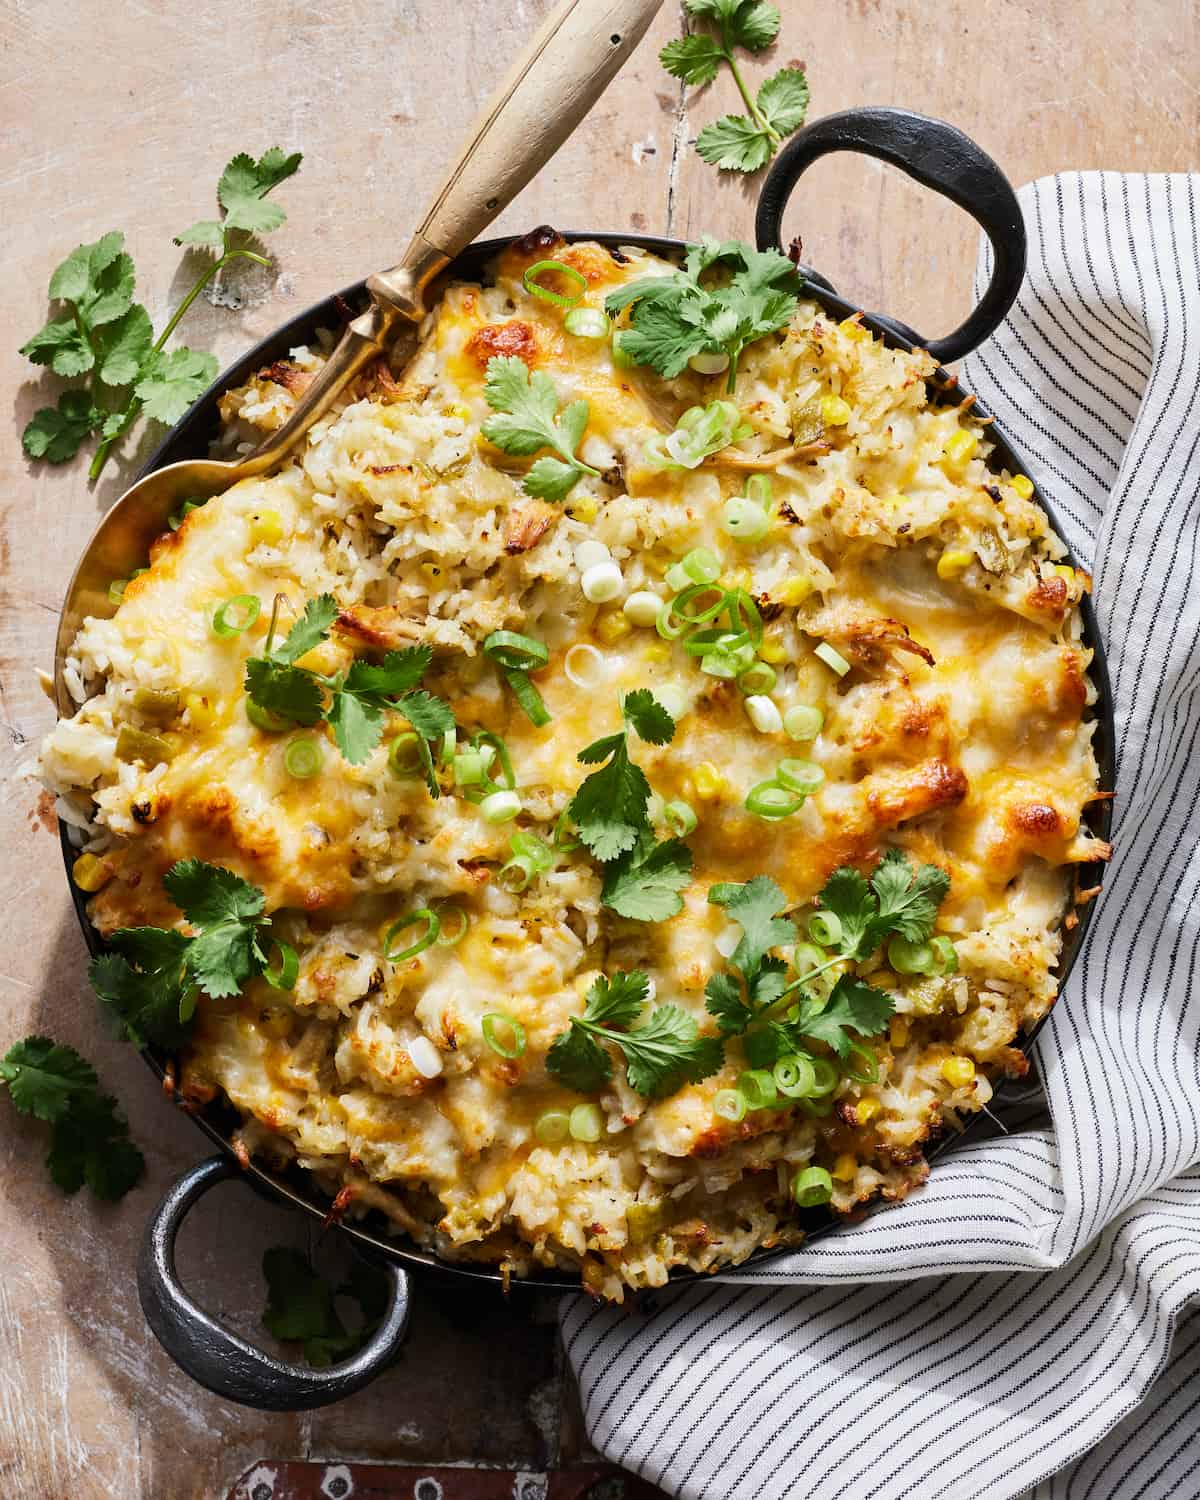 Chicken Rice and Cheese Casserole is served in a black round metal braiser. The casserole is garnished with lots of cilantro and scallions.